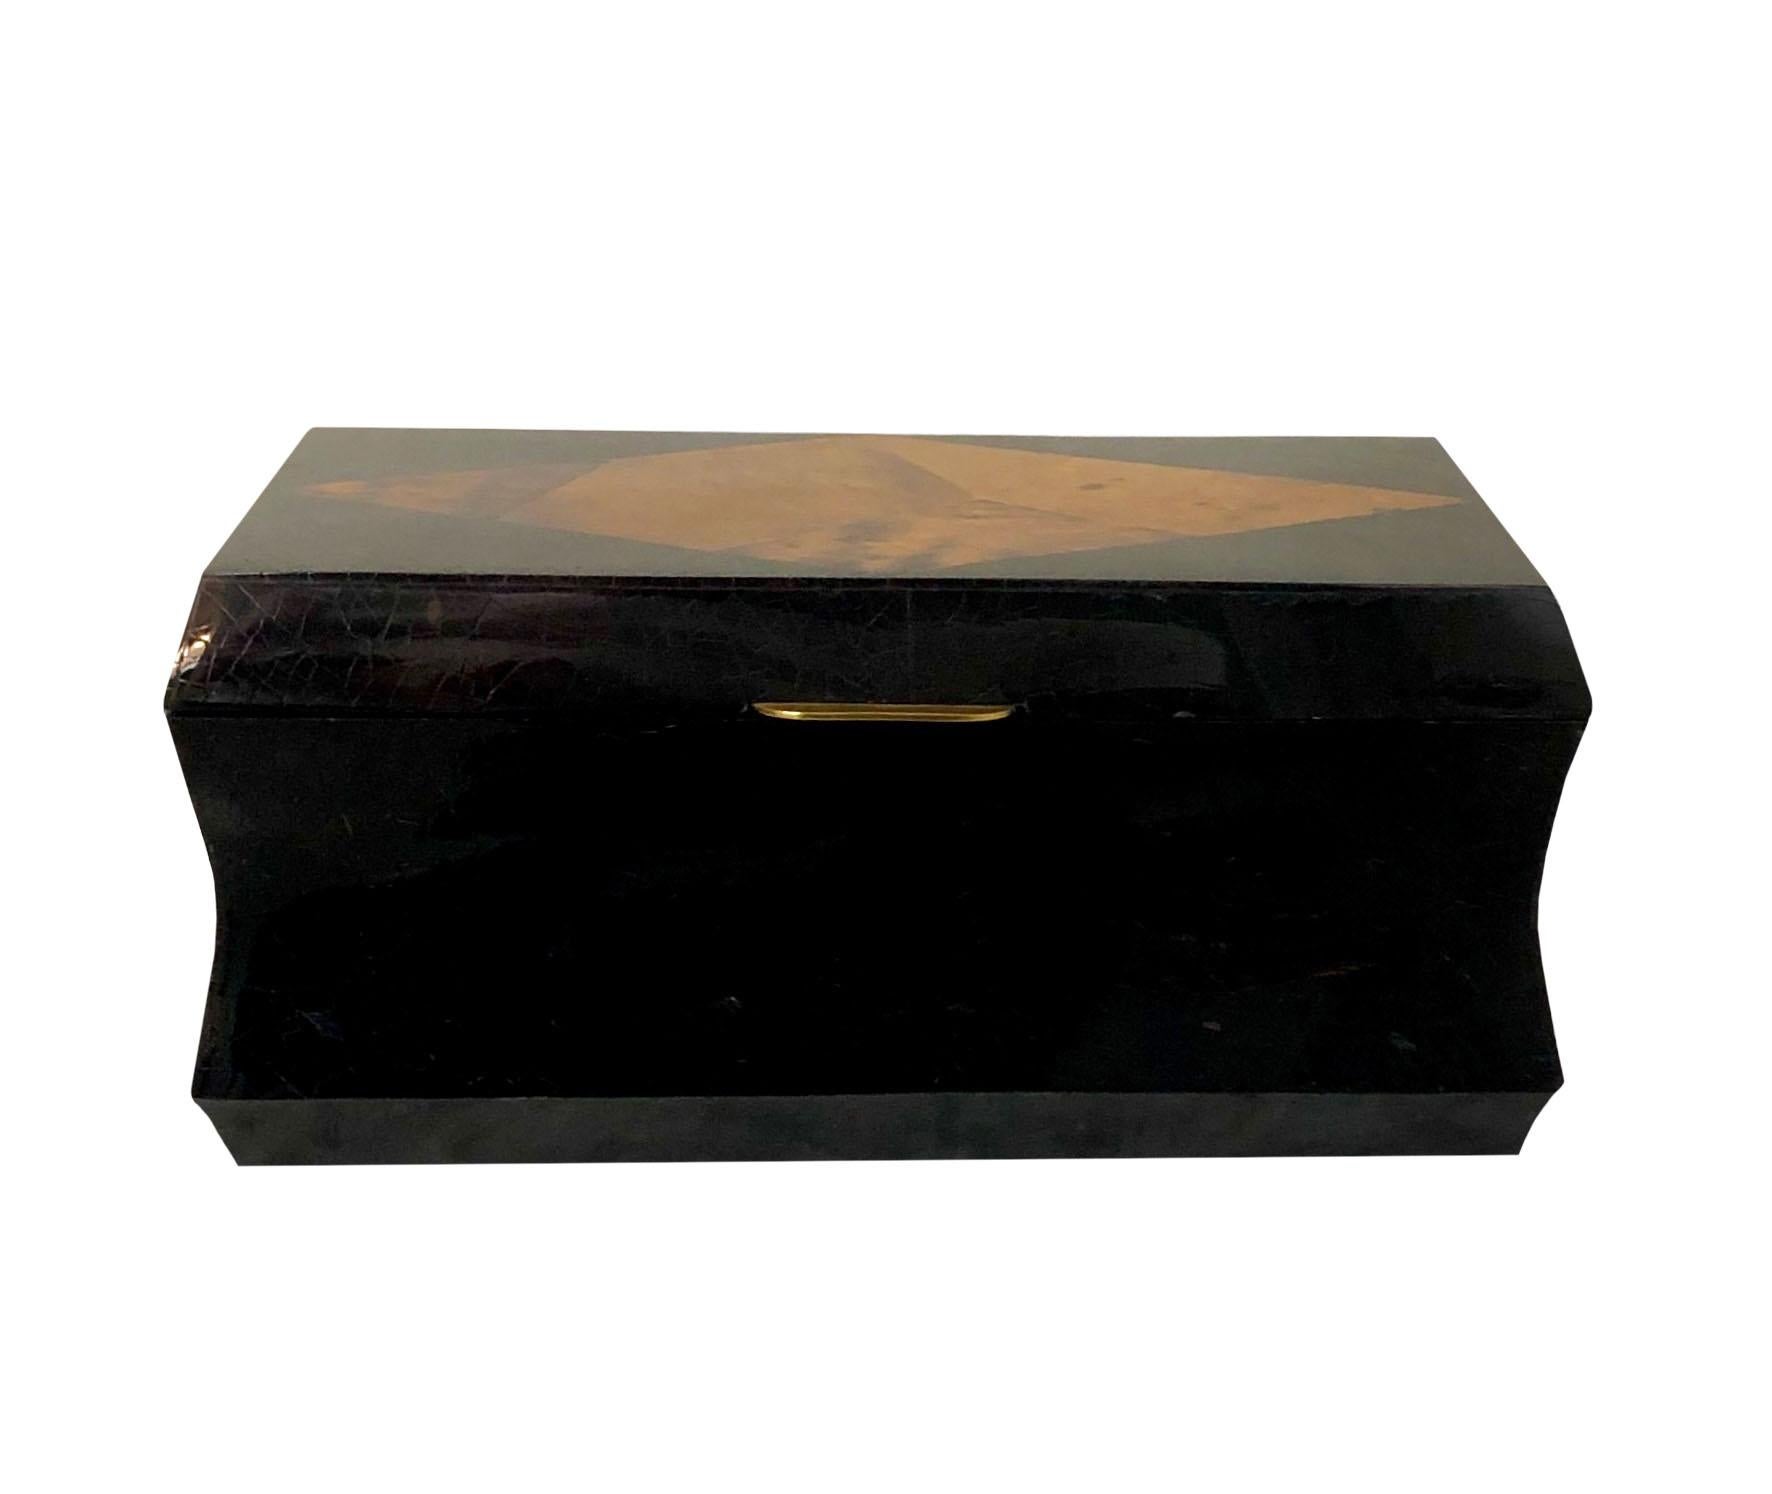 A vintage 1970s Maitland Smith crackled lacquer box with a burled walnut inlay and brass fittings. Box is a dark brown and retains its original label. The interior is lined with black felt and the bottom is brown felt. A beautiful box for any room.